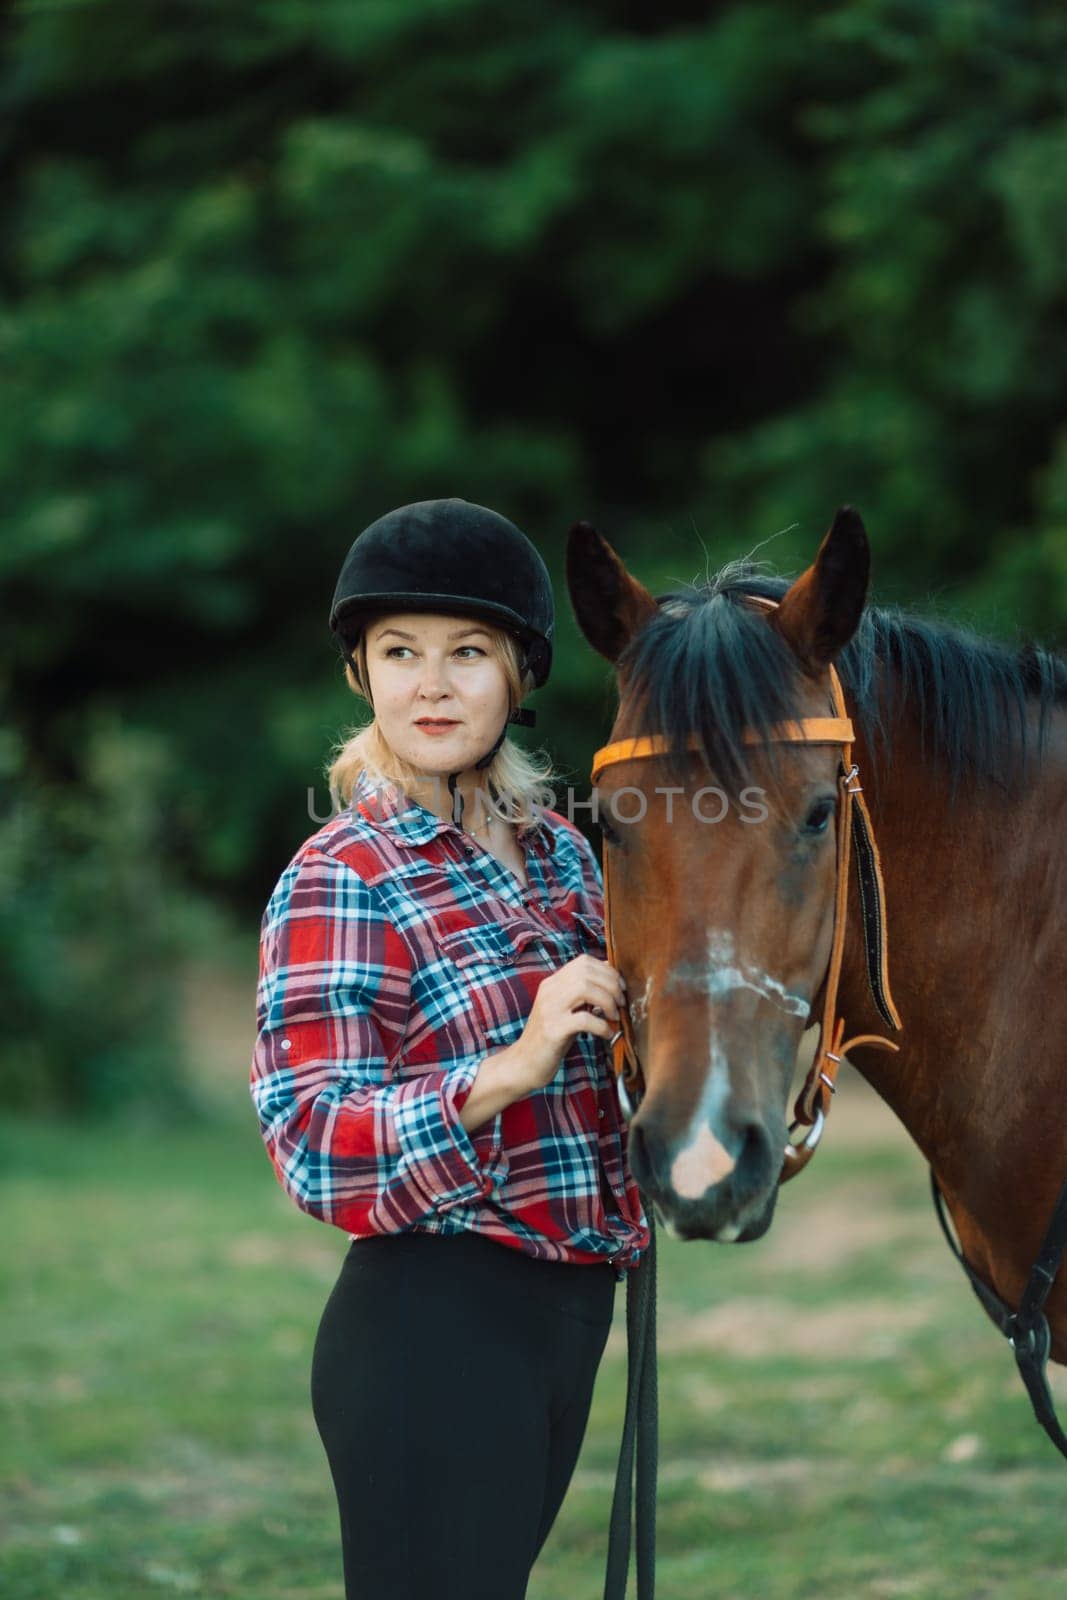 Happy blonde with horse in forest. Woman and a horse walking through the field during the day. Dressed in a plaid shirt and black leggings